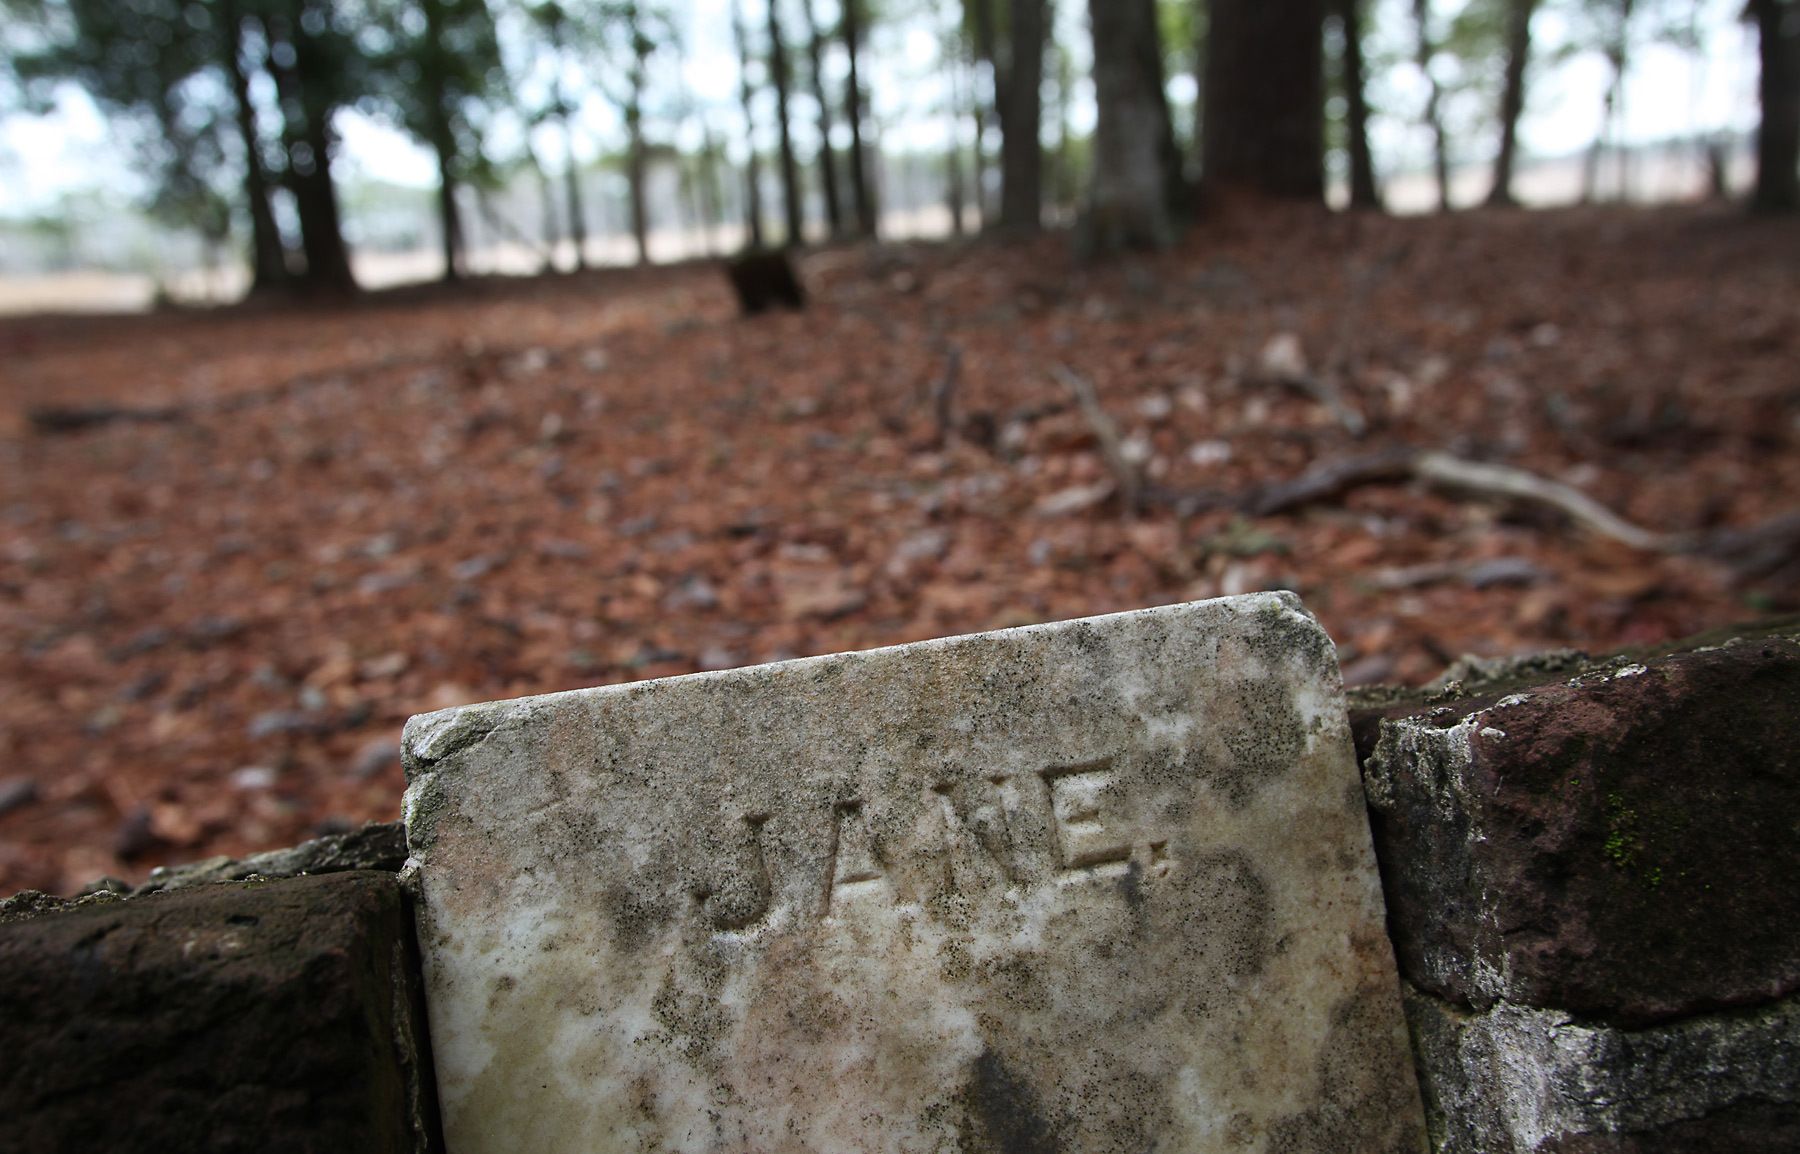 A grave stone with just the first name of Jane shows the passage of time at the slave cemetery at Friendfield Plantation February 17, 2012, in Georgetown, S.C.  According to the 1860 census, 273 slaves lived at Friendfield Plantation. The property has ties to Michelle Obama's family in South Carolina. According to plantation employees, Obama's great-great-grandfather, Jim Robinson, was a slave at Friendfield Plantation. In the South Carolina Lowcountry, more than a half-dozen antebellum plantations, which don't change hands often, are for sale. REUTERS/Randall Hill